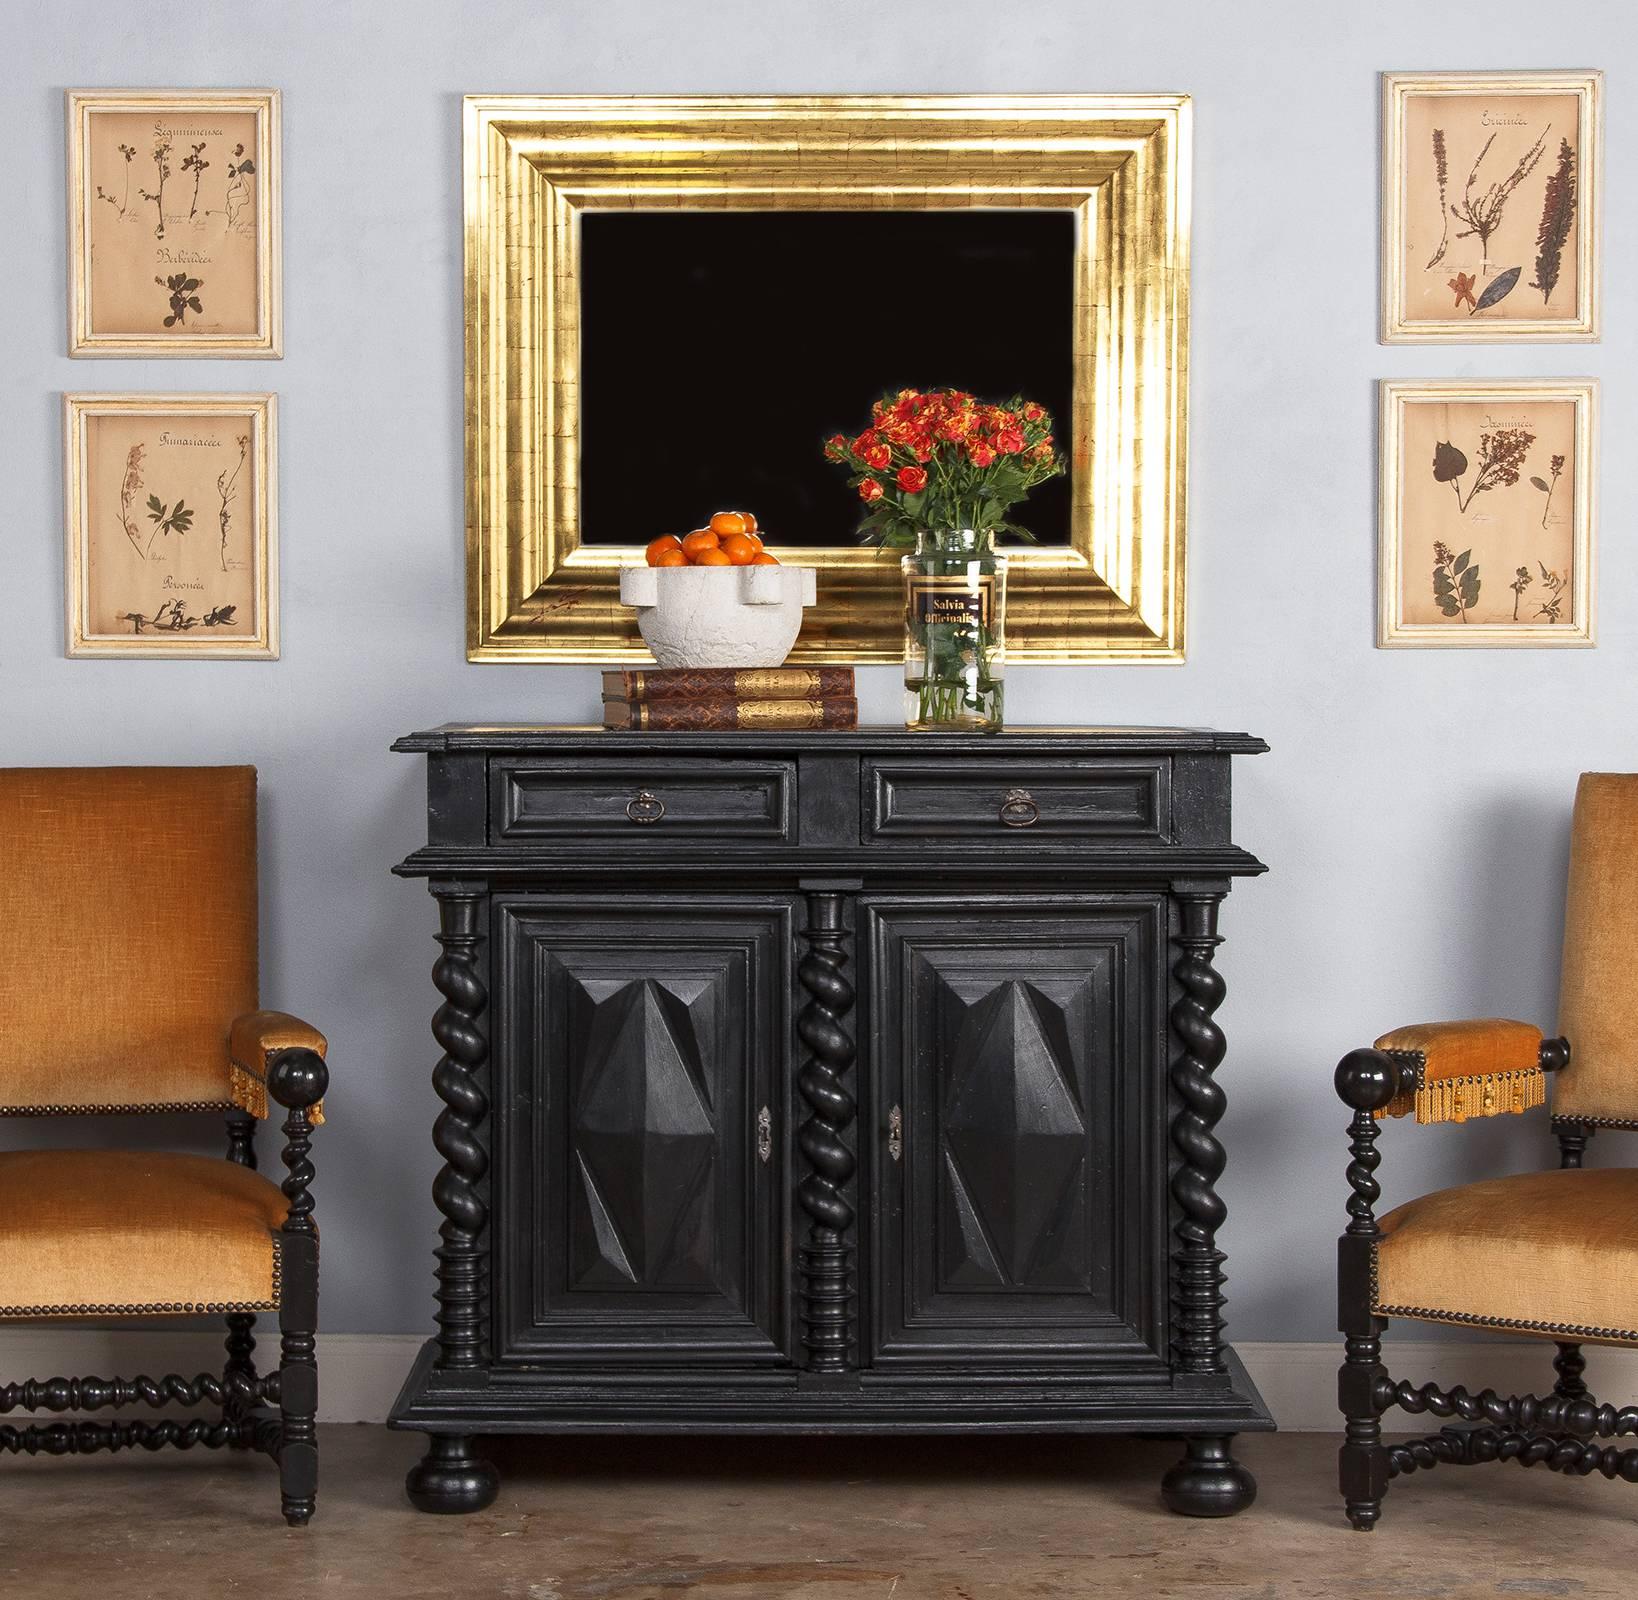 A statuesque French buffet in the Louis XIII style dating from the 18th century. The buffet was once ebonized on walnut but was recently repainted in black with a light grey interior. The buffet rests on bun feet and features two drawers and two